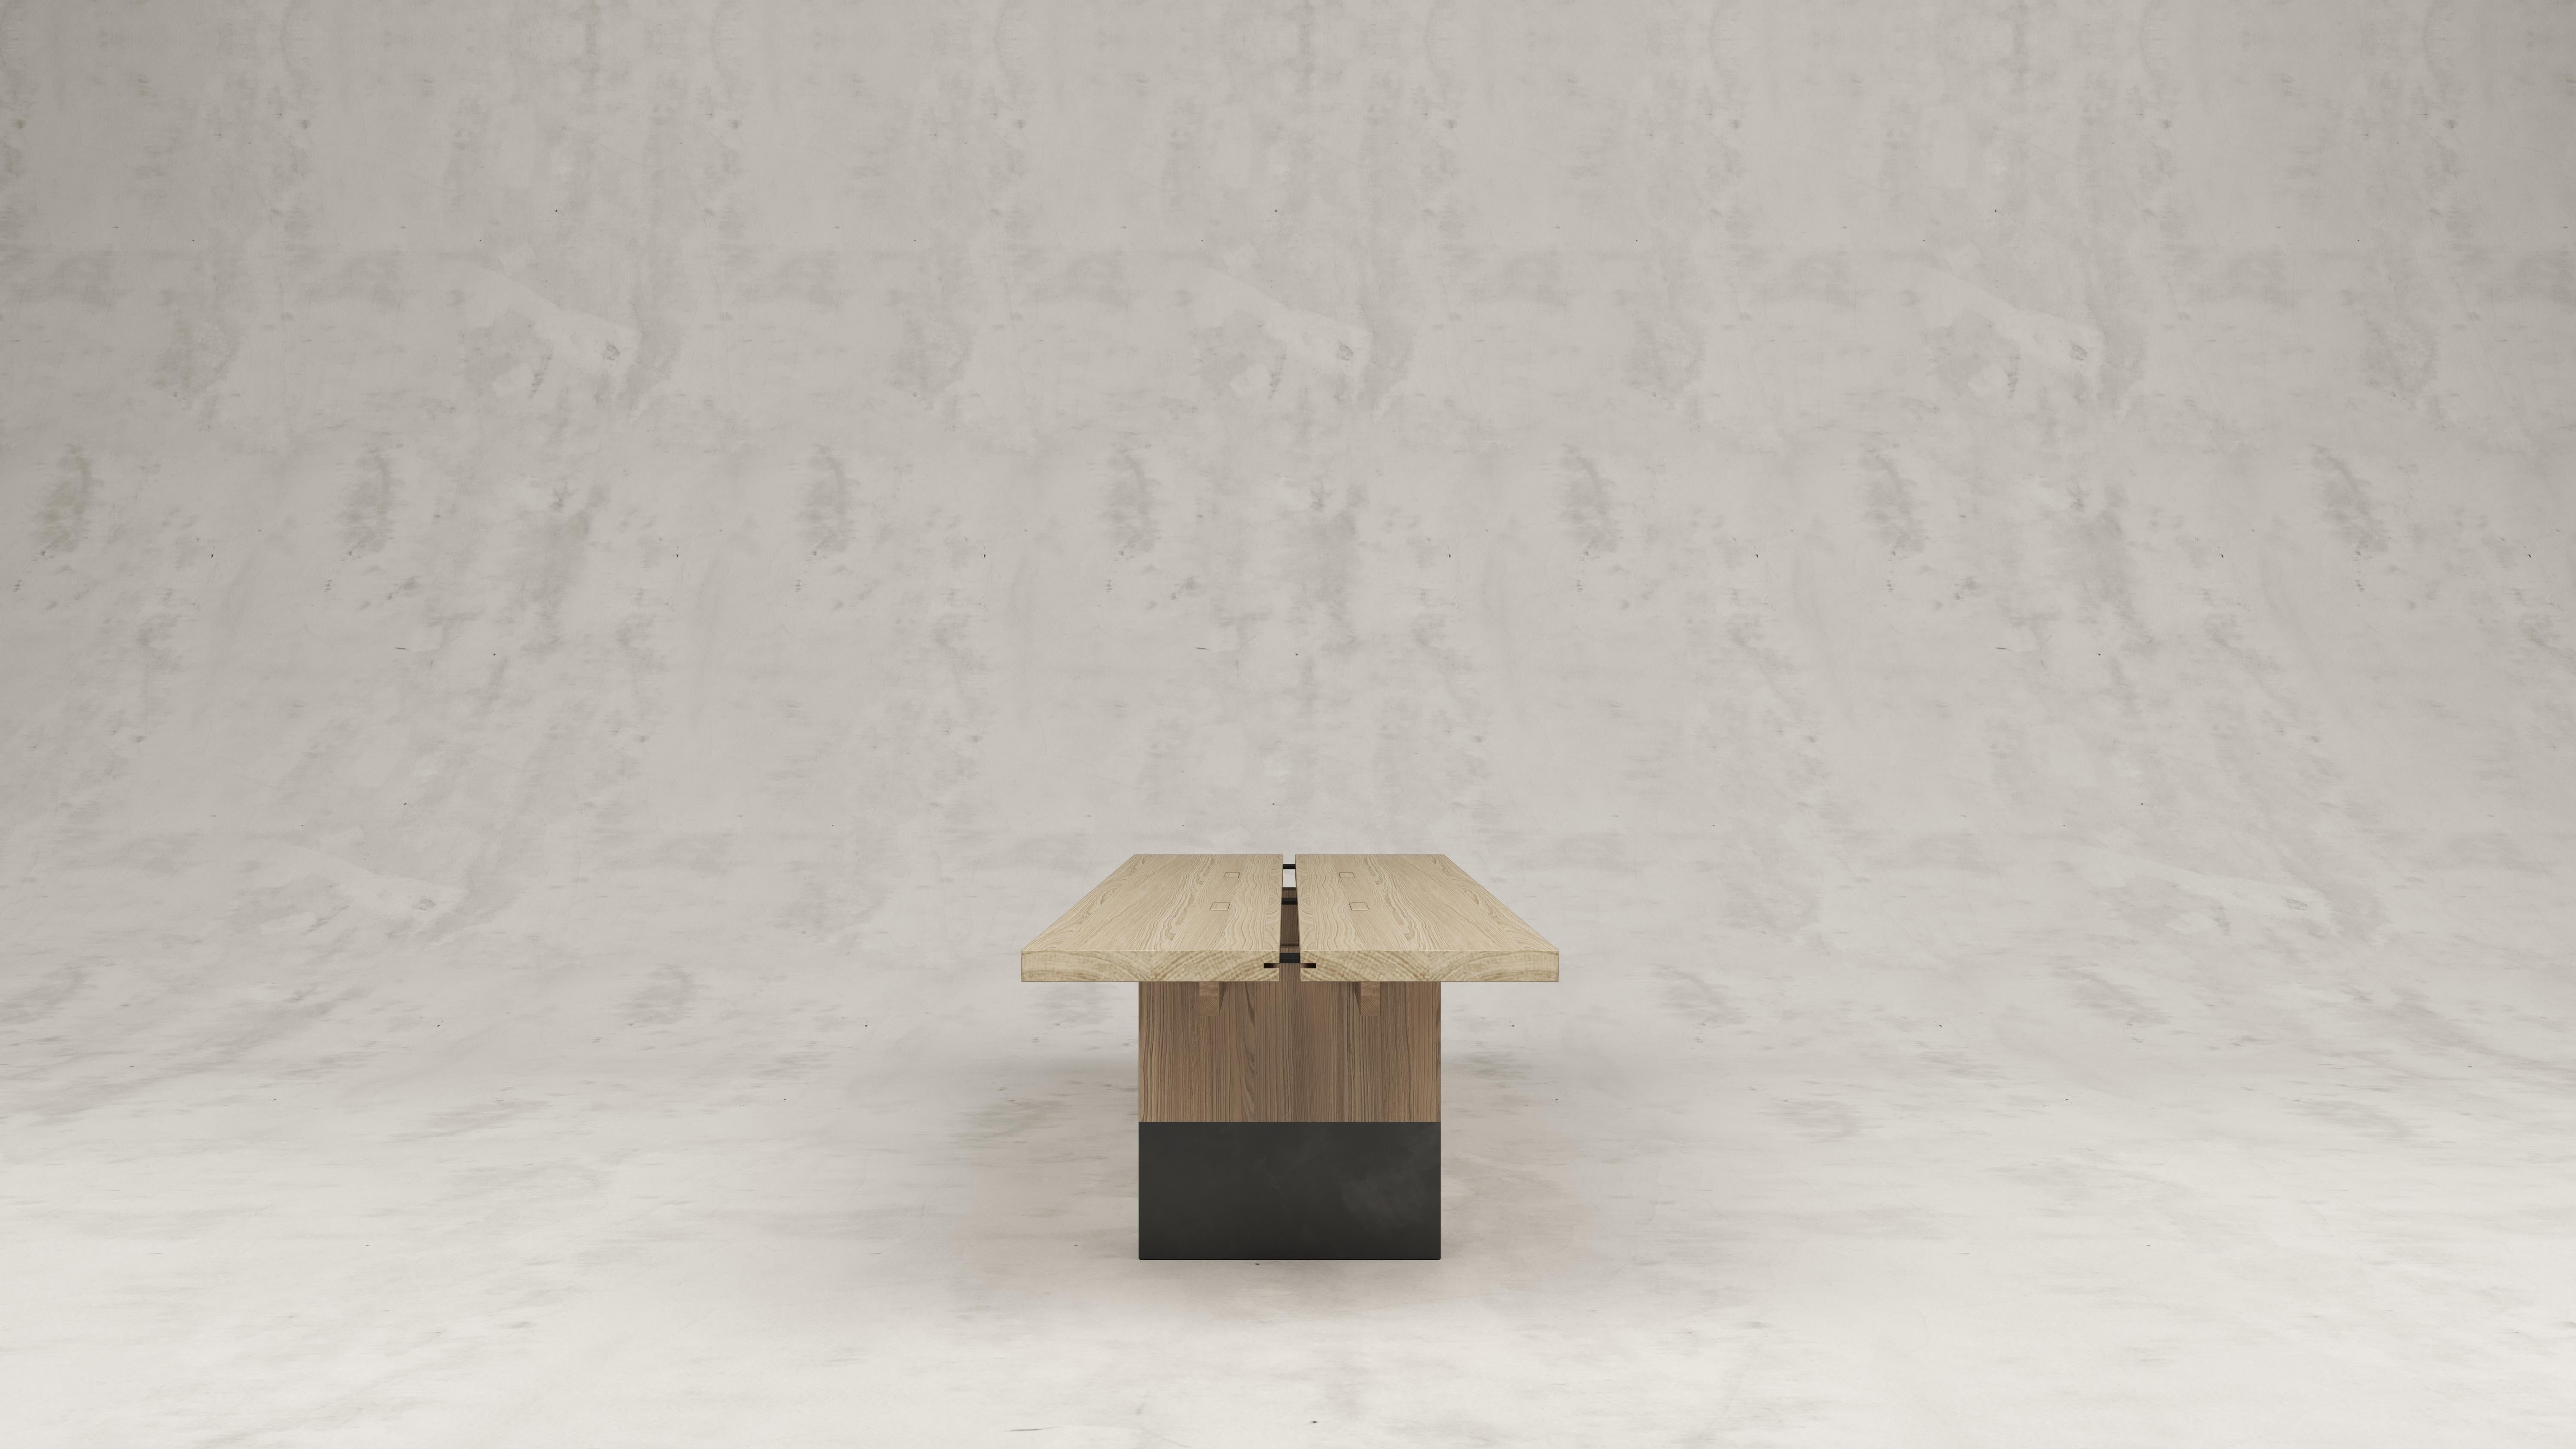 Rift wood and metal dining table by Andy Kerstens
Without little feet
Dimensions: W 240 x D 98 x H 74 cm
Materials: Bleached Oak, Powder coated inox
Optional little feet at table legs.
Handmade in Belgium

Available in Solid Larch, Oak and